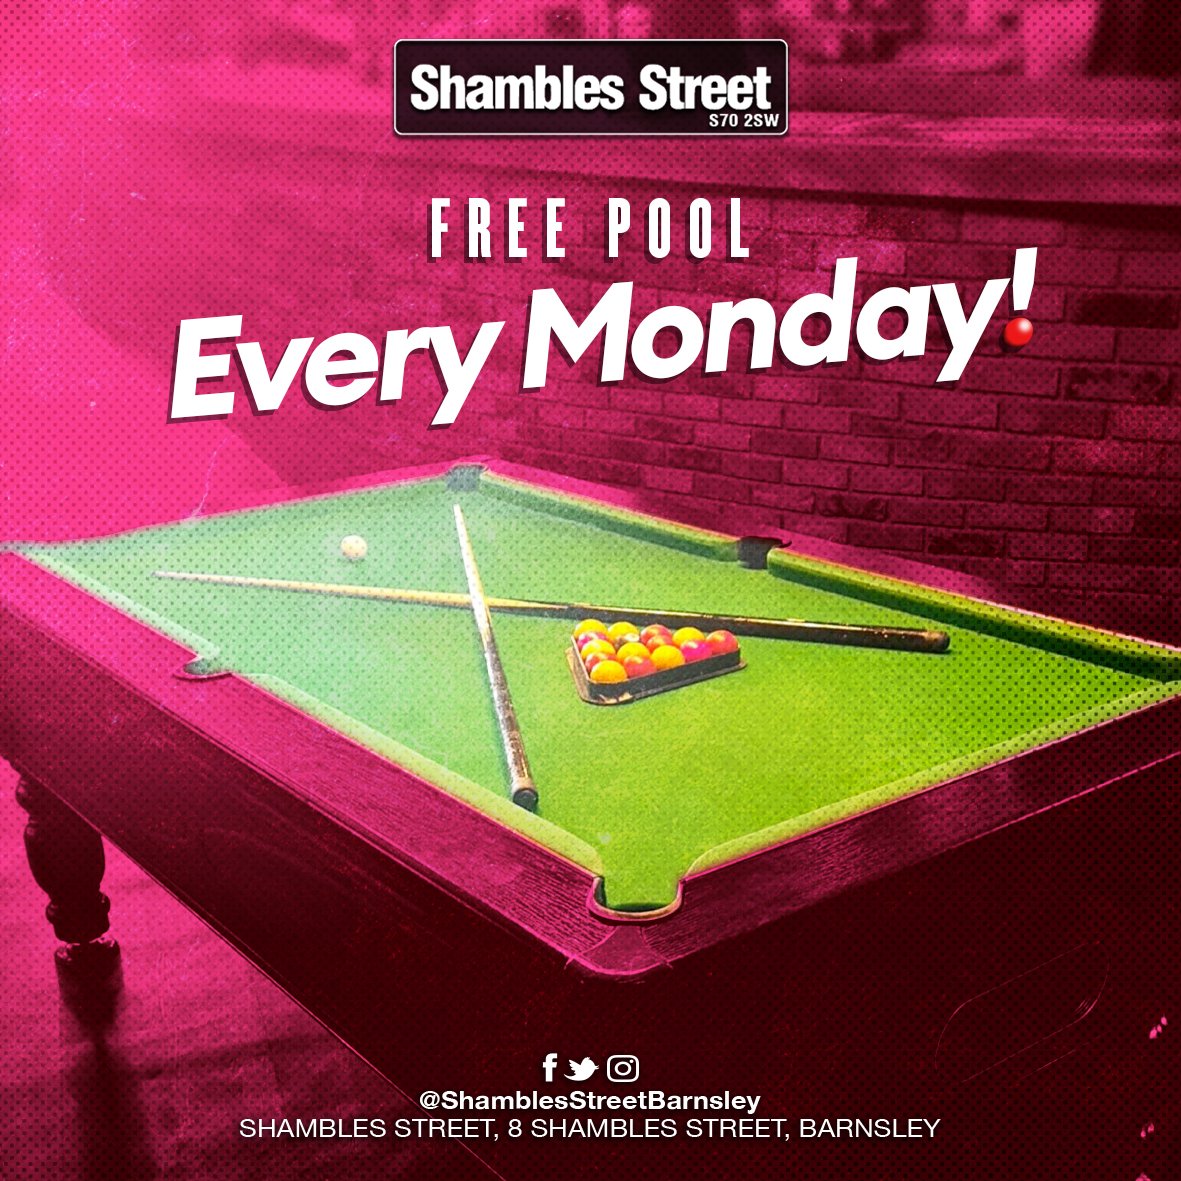 🌟FREE POOL EVERY MONDAY🌟 2-for-1 cocktails every day until 7pm. Freshly cooked pizza straight to